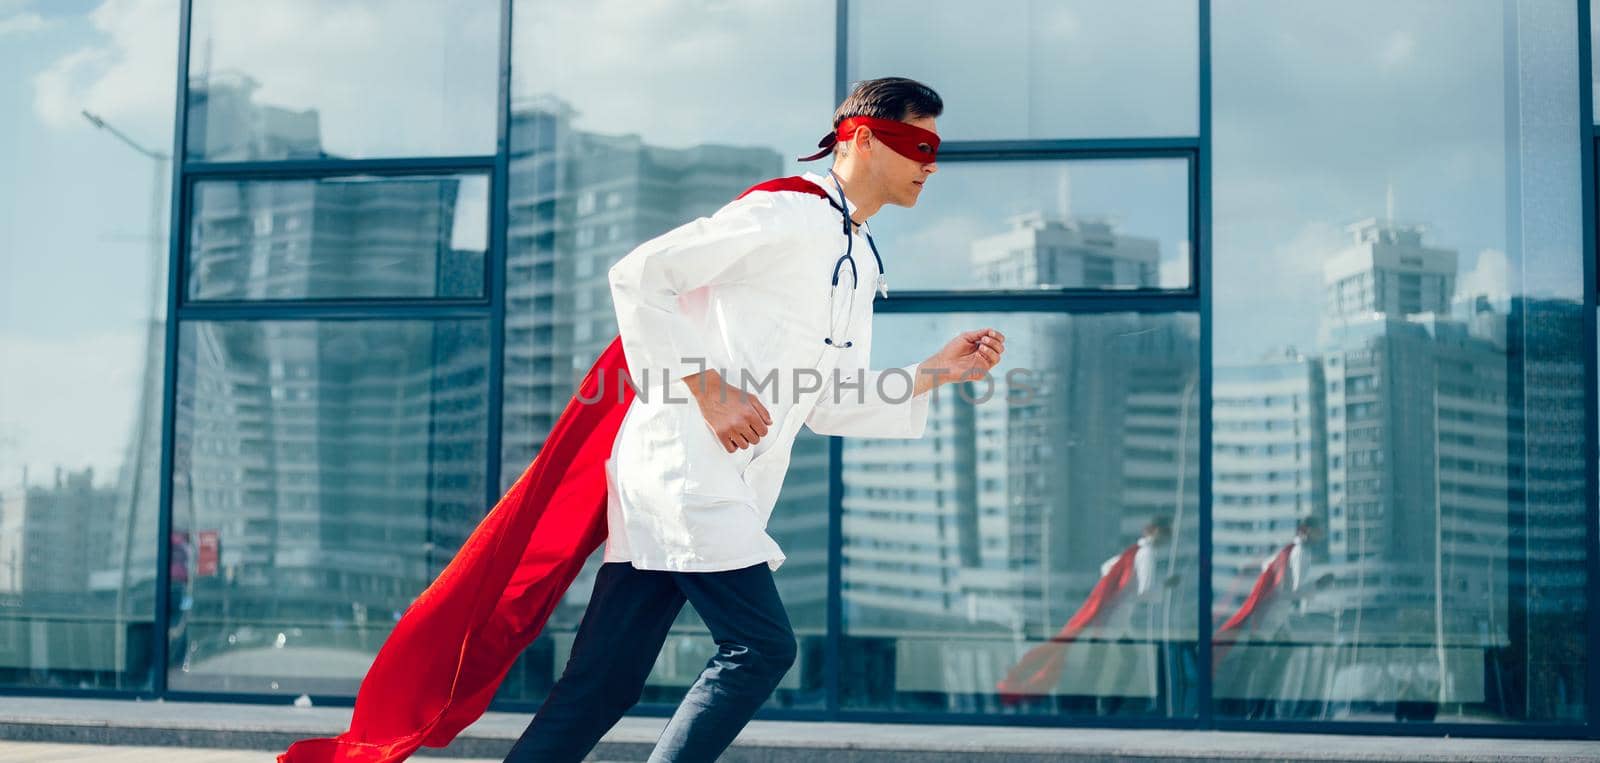 doctor is a superhero running through the city streets. by SmartPhotoLab